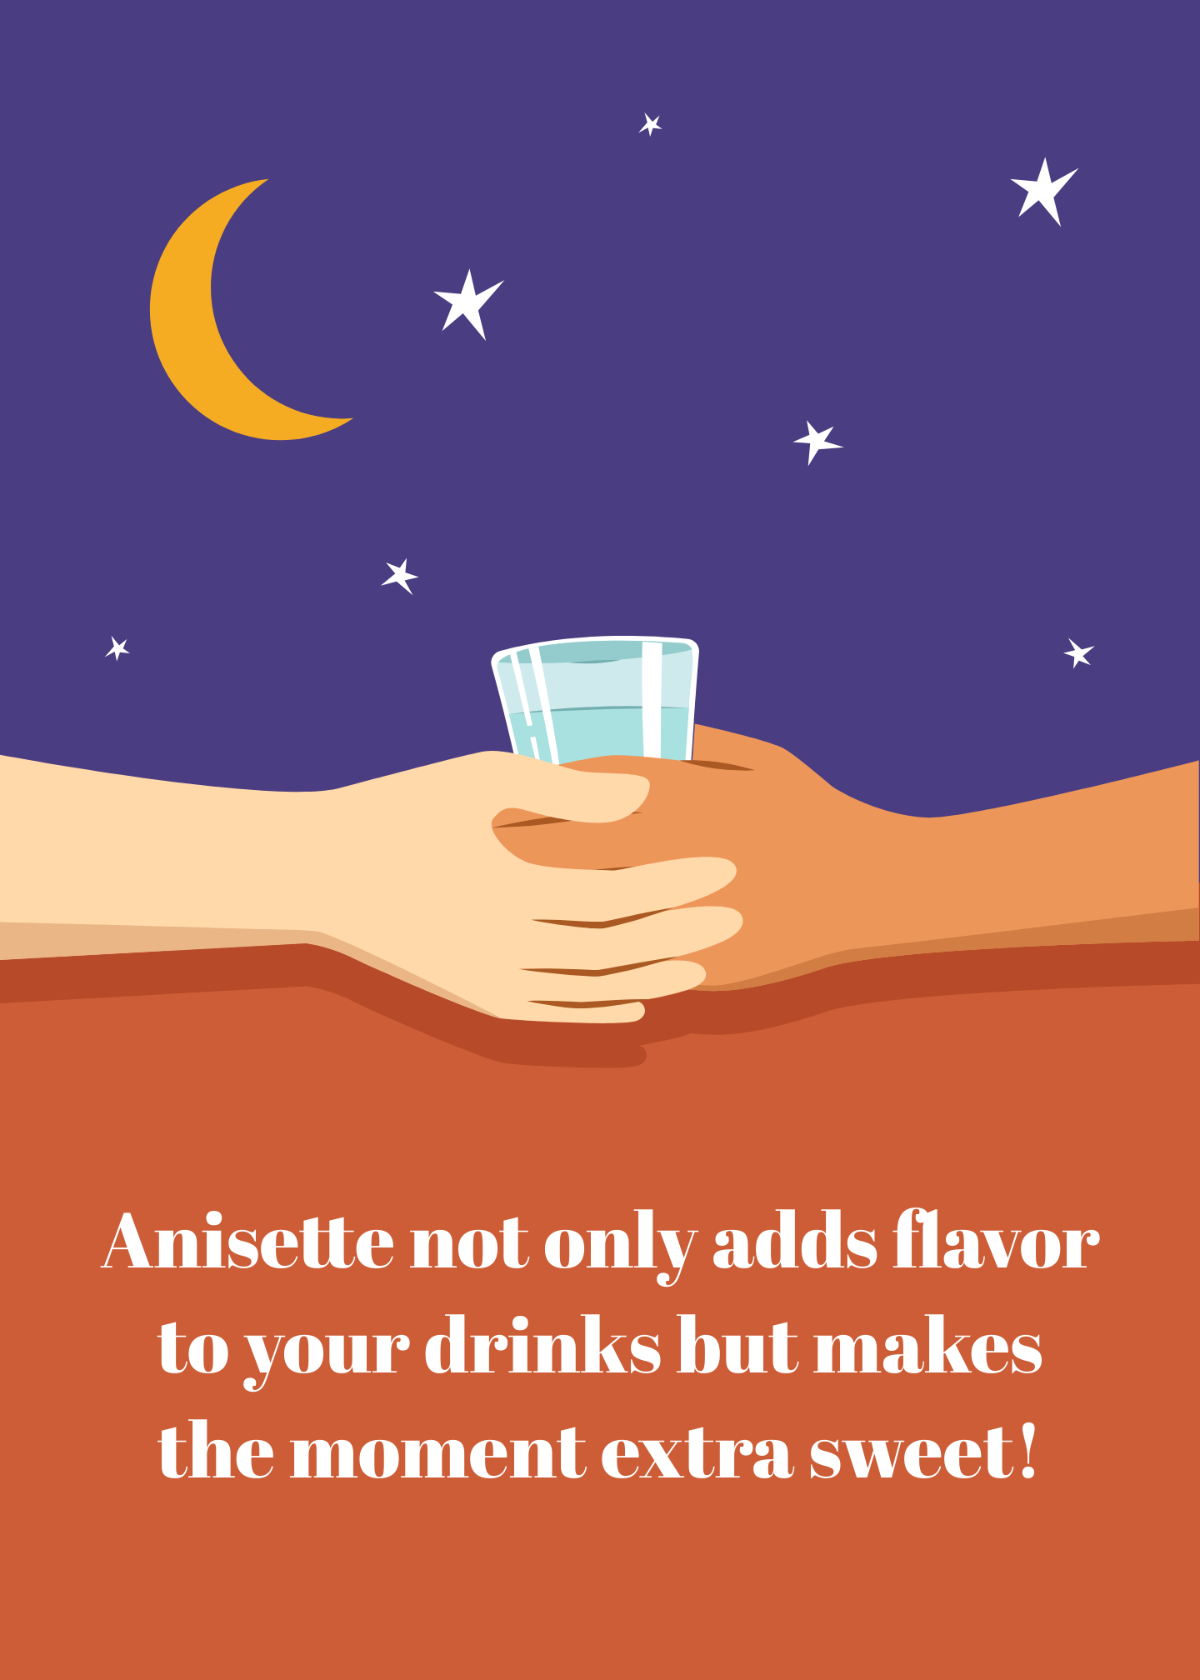 National Anisette Day Message  Template